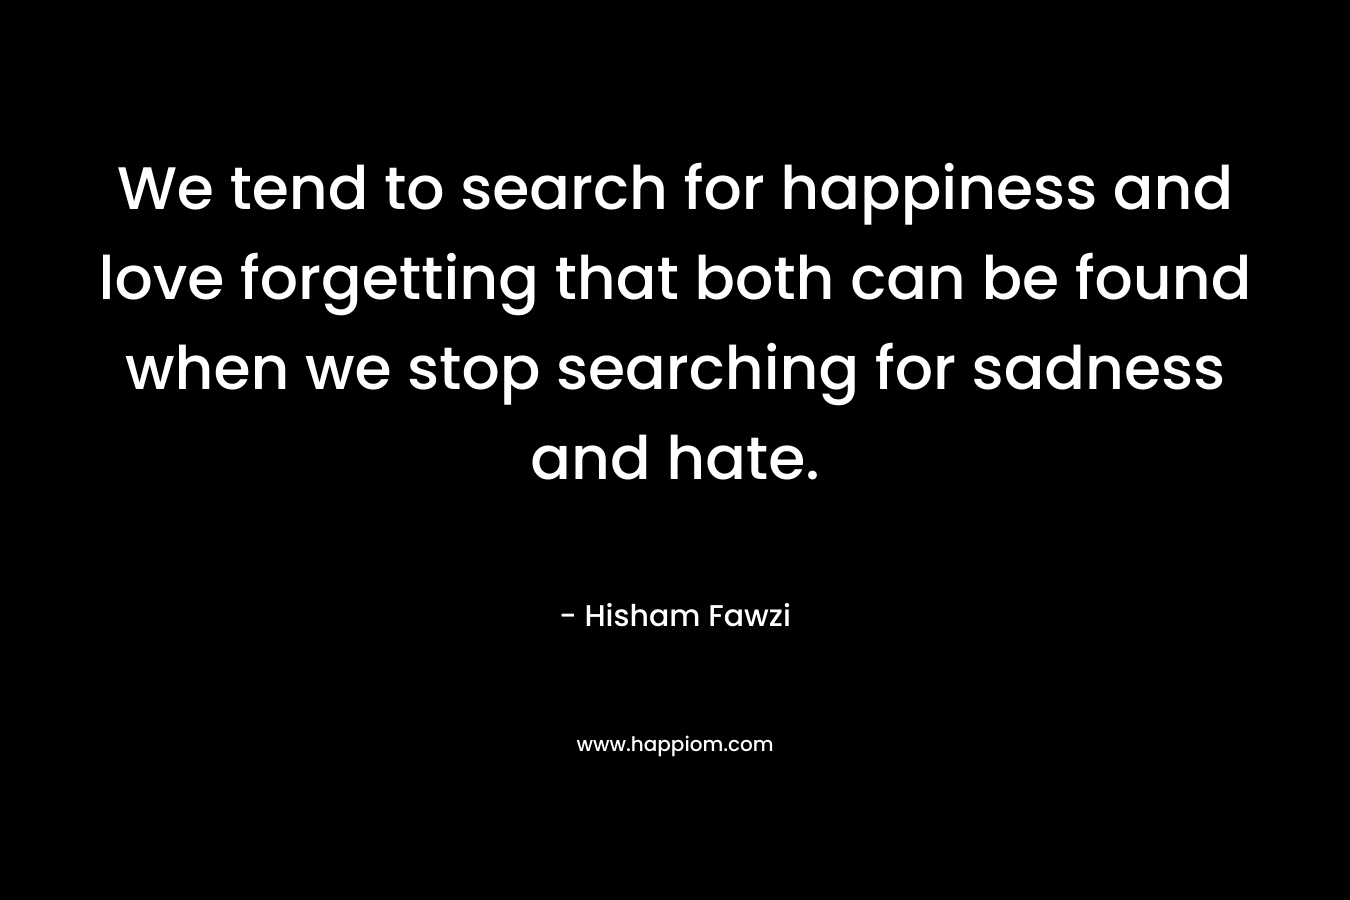 We tend to search for happiness and love forgetting that both can be found when we stop searching for sadness and hate.